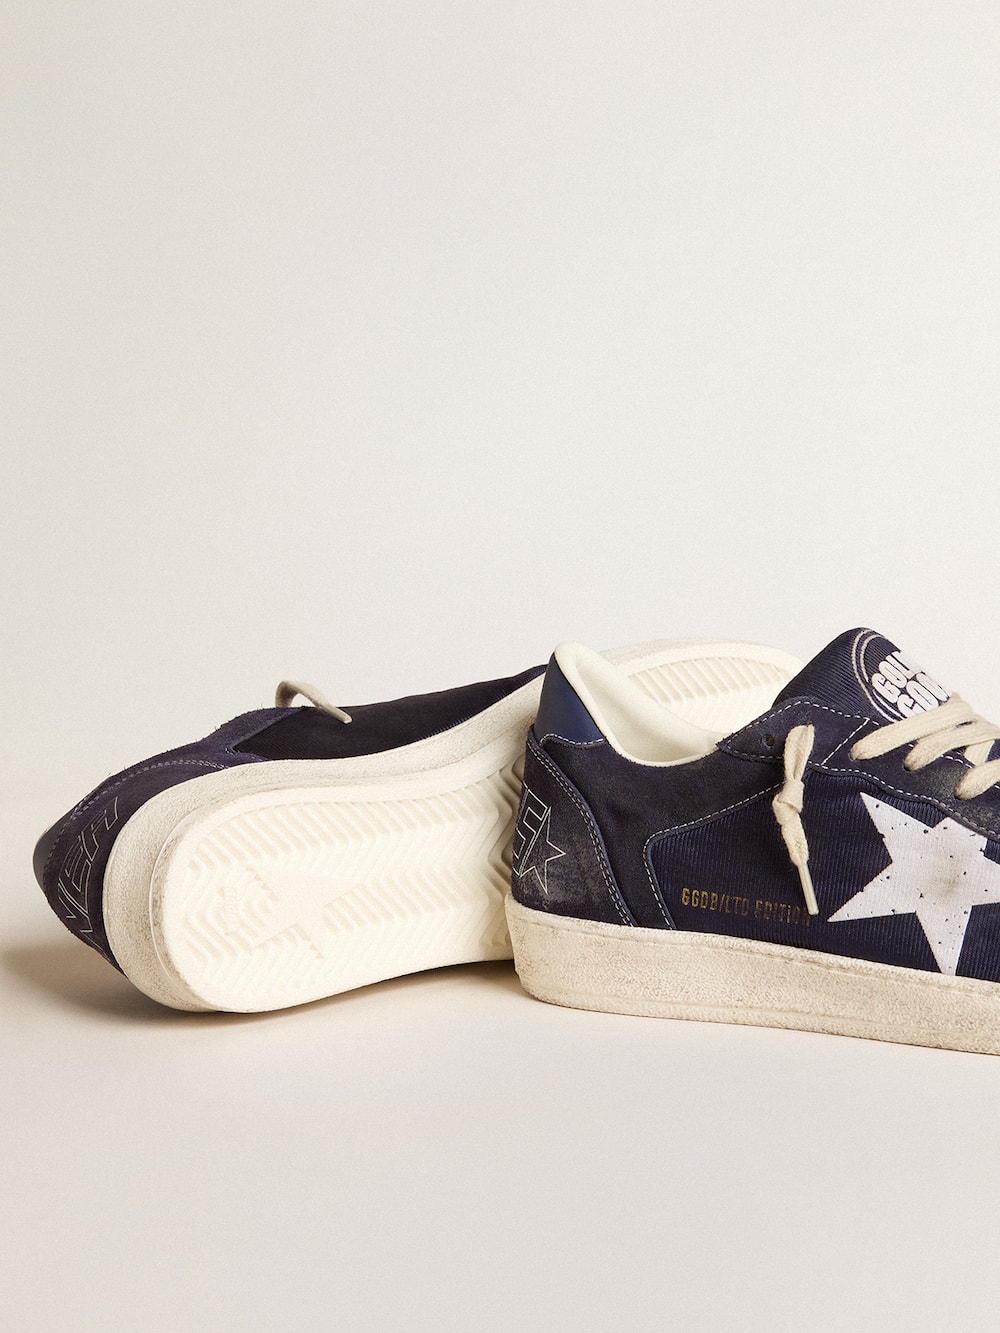 Golden Goose - Ball Star LTD in blue suede and nylon with white star and blue heel tab in 